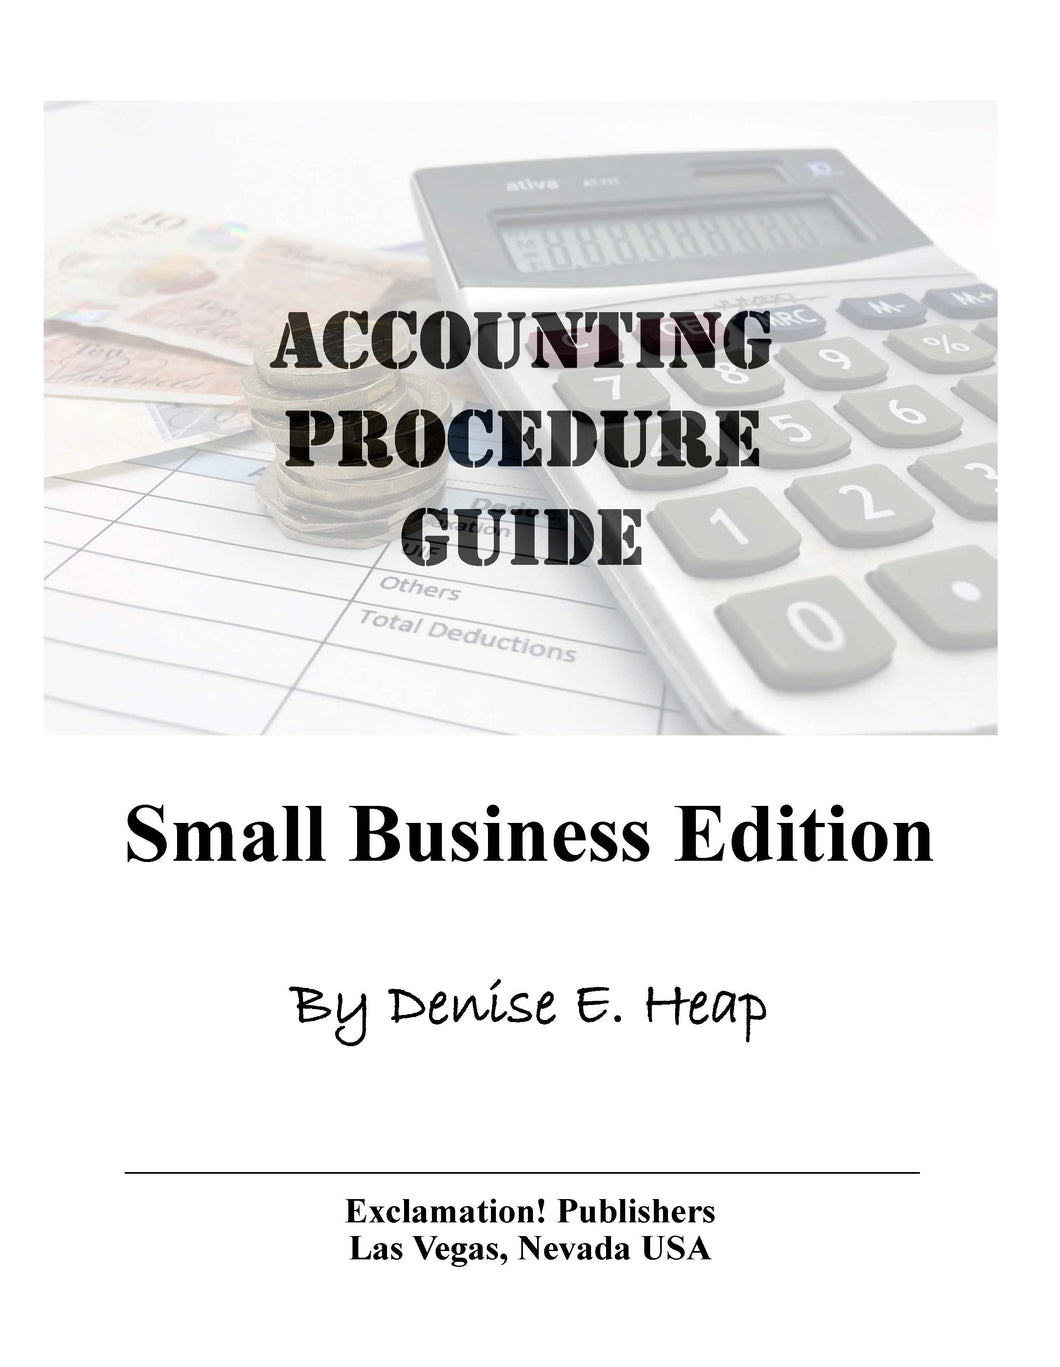 Accounting procedure guide. For small businesses.